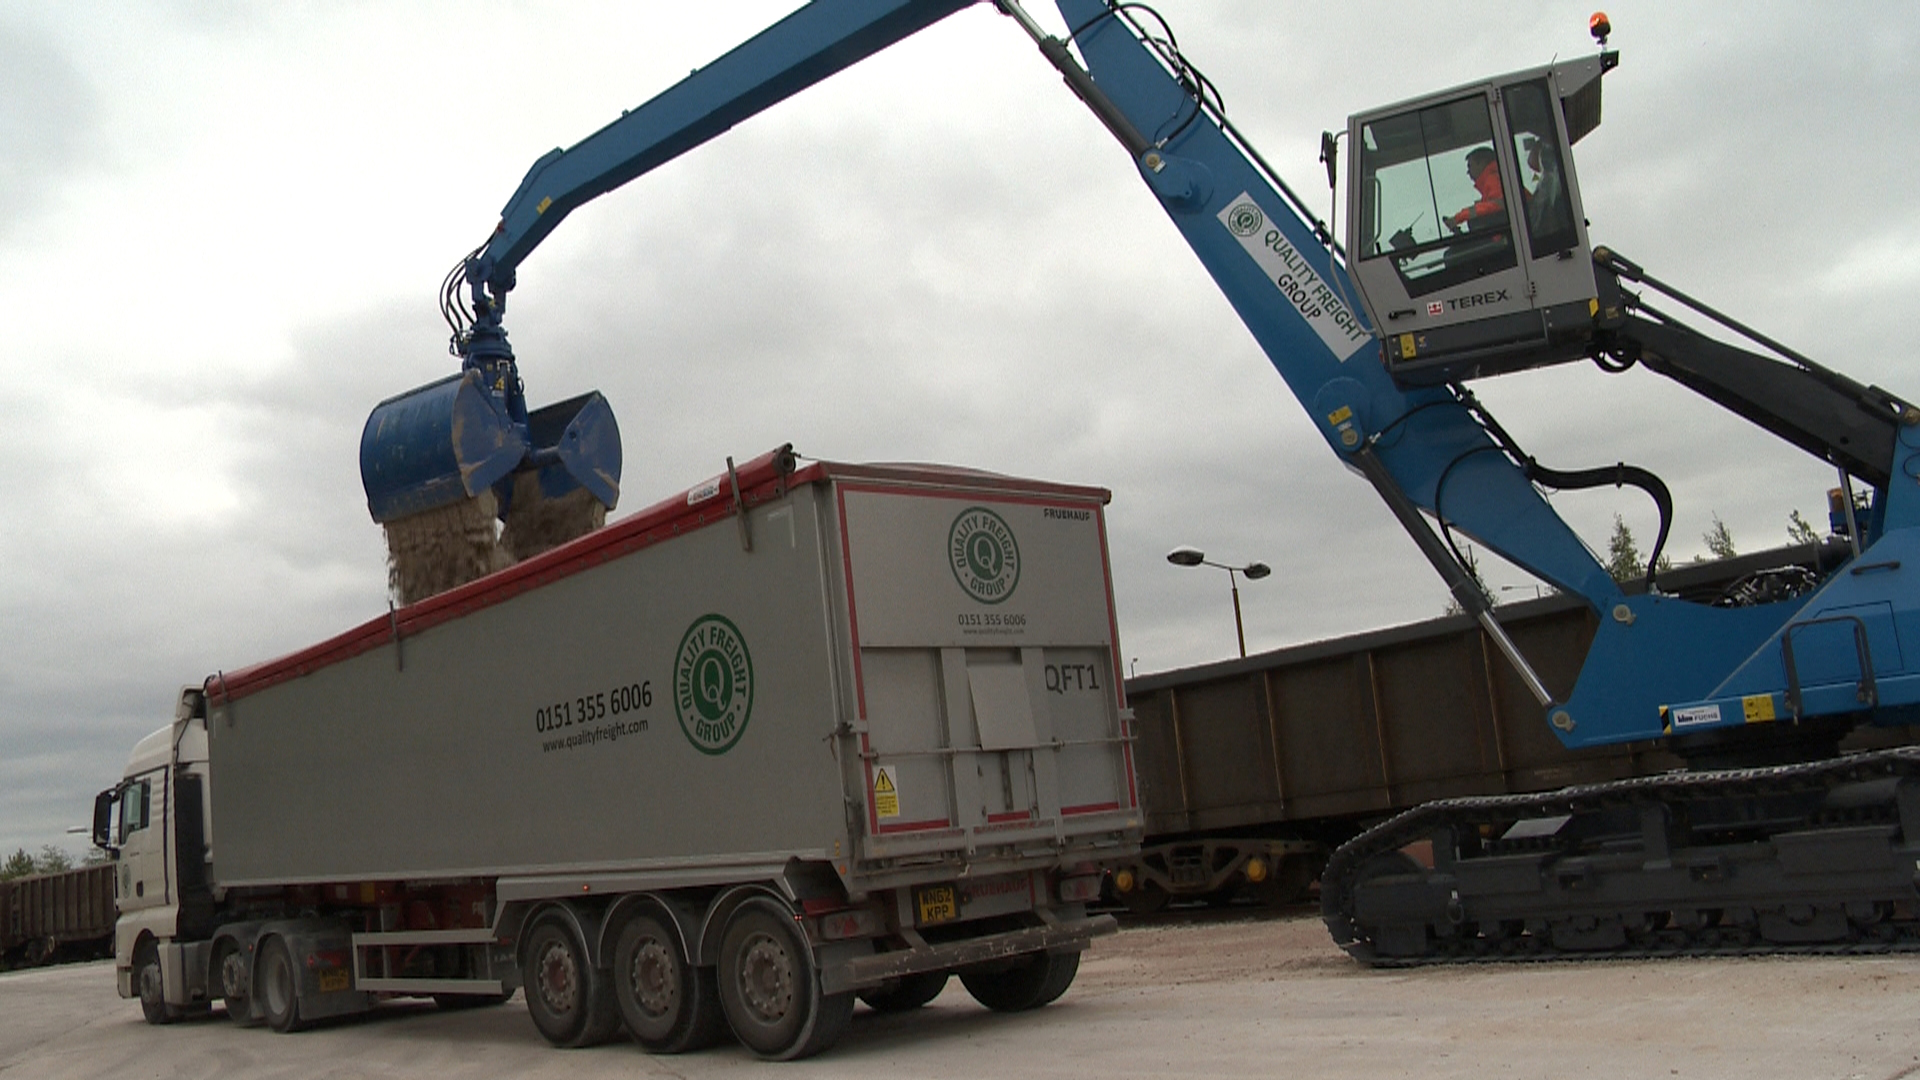 Quality Freight UK’s Fuchs RHL340 mobile crane in action